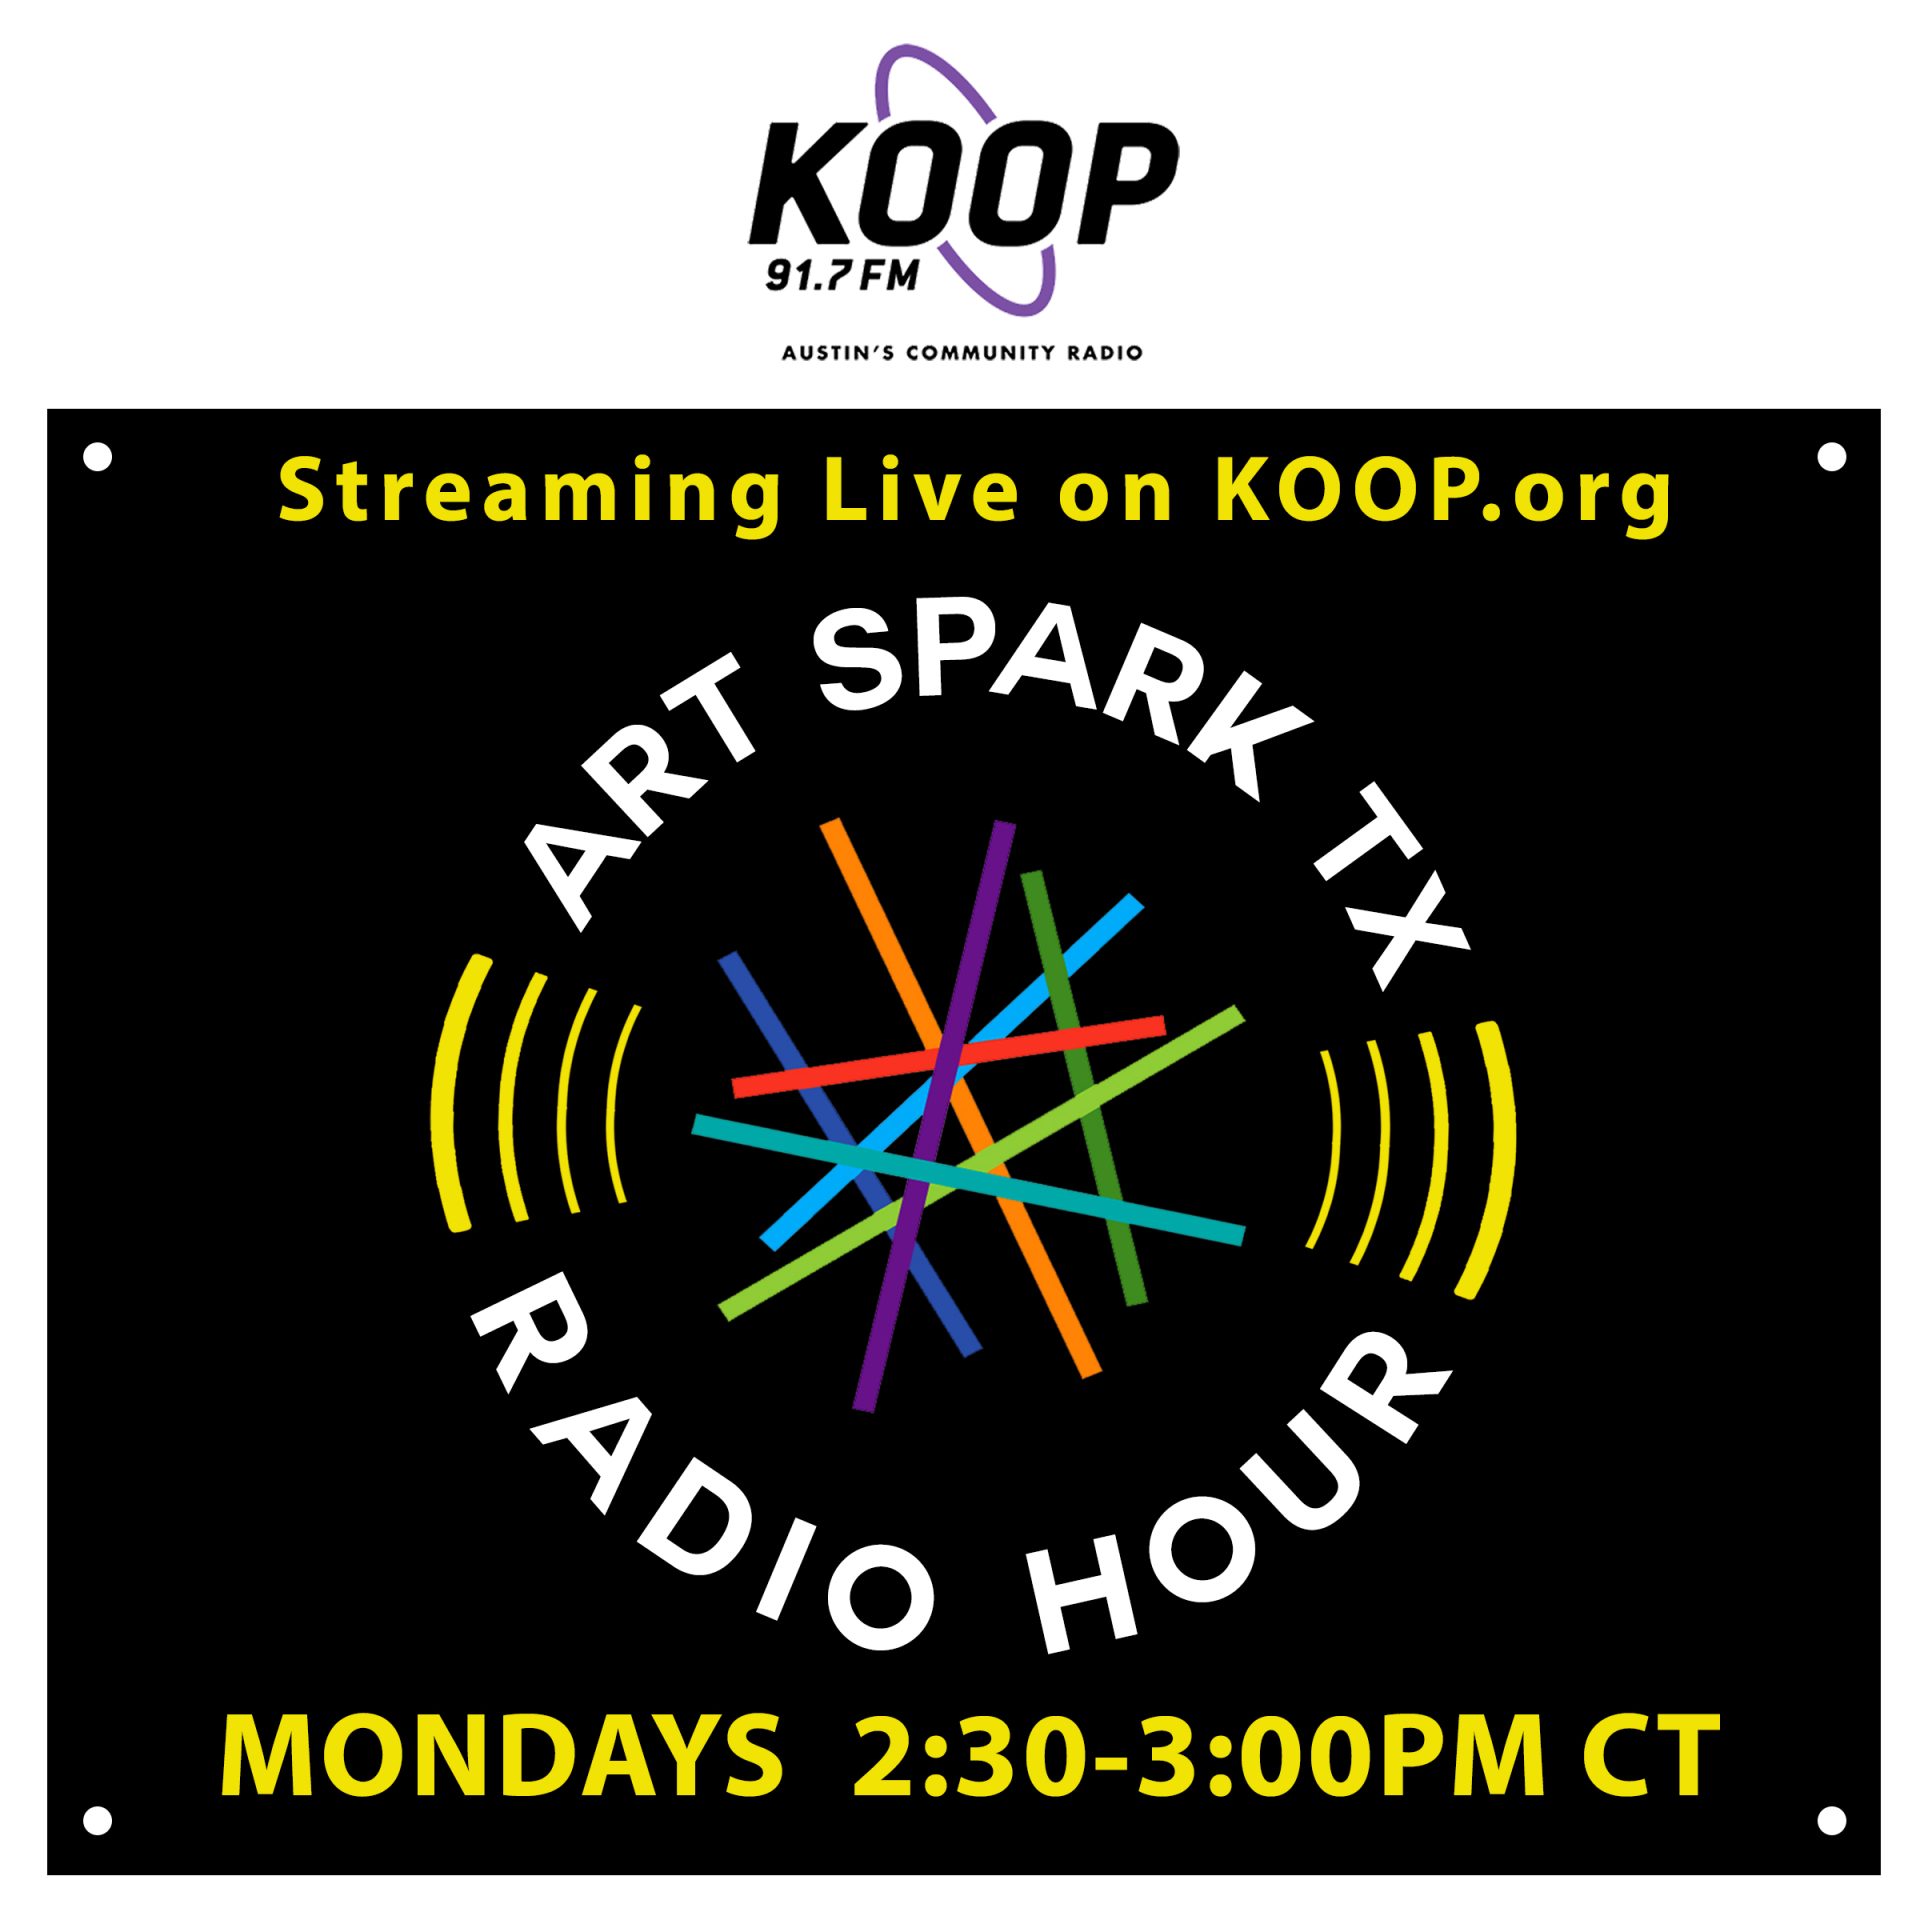 stylized graphic with text that reads, "Art Spark TX Radio Hour, Mondays 2:30-3:00 PM CT. Streaming live on KOOP.org."